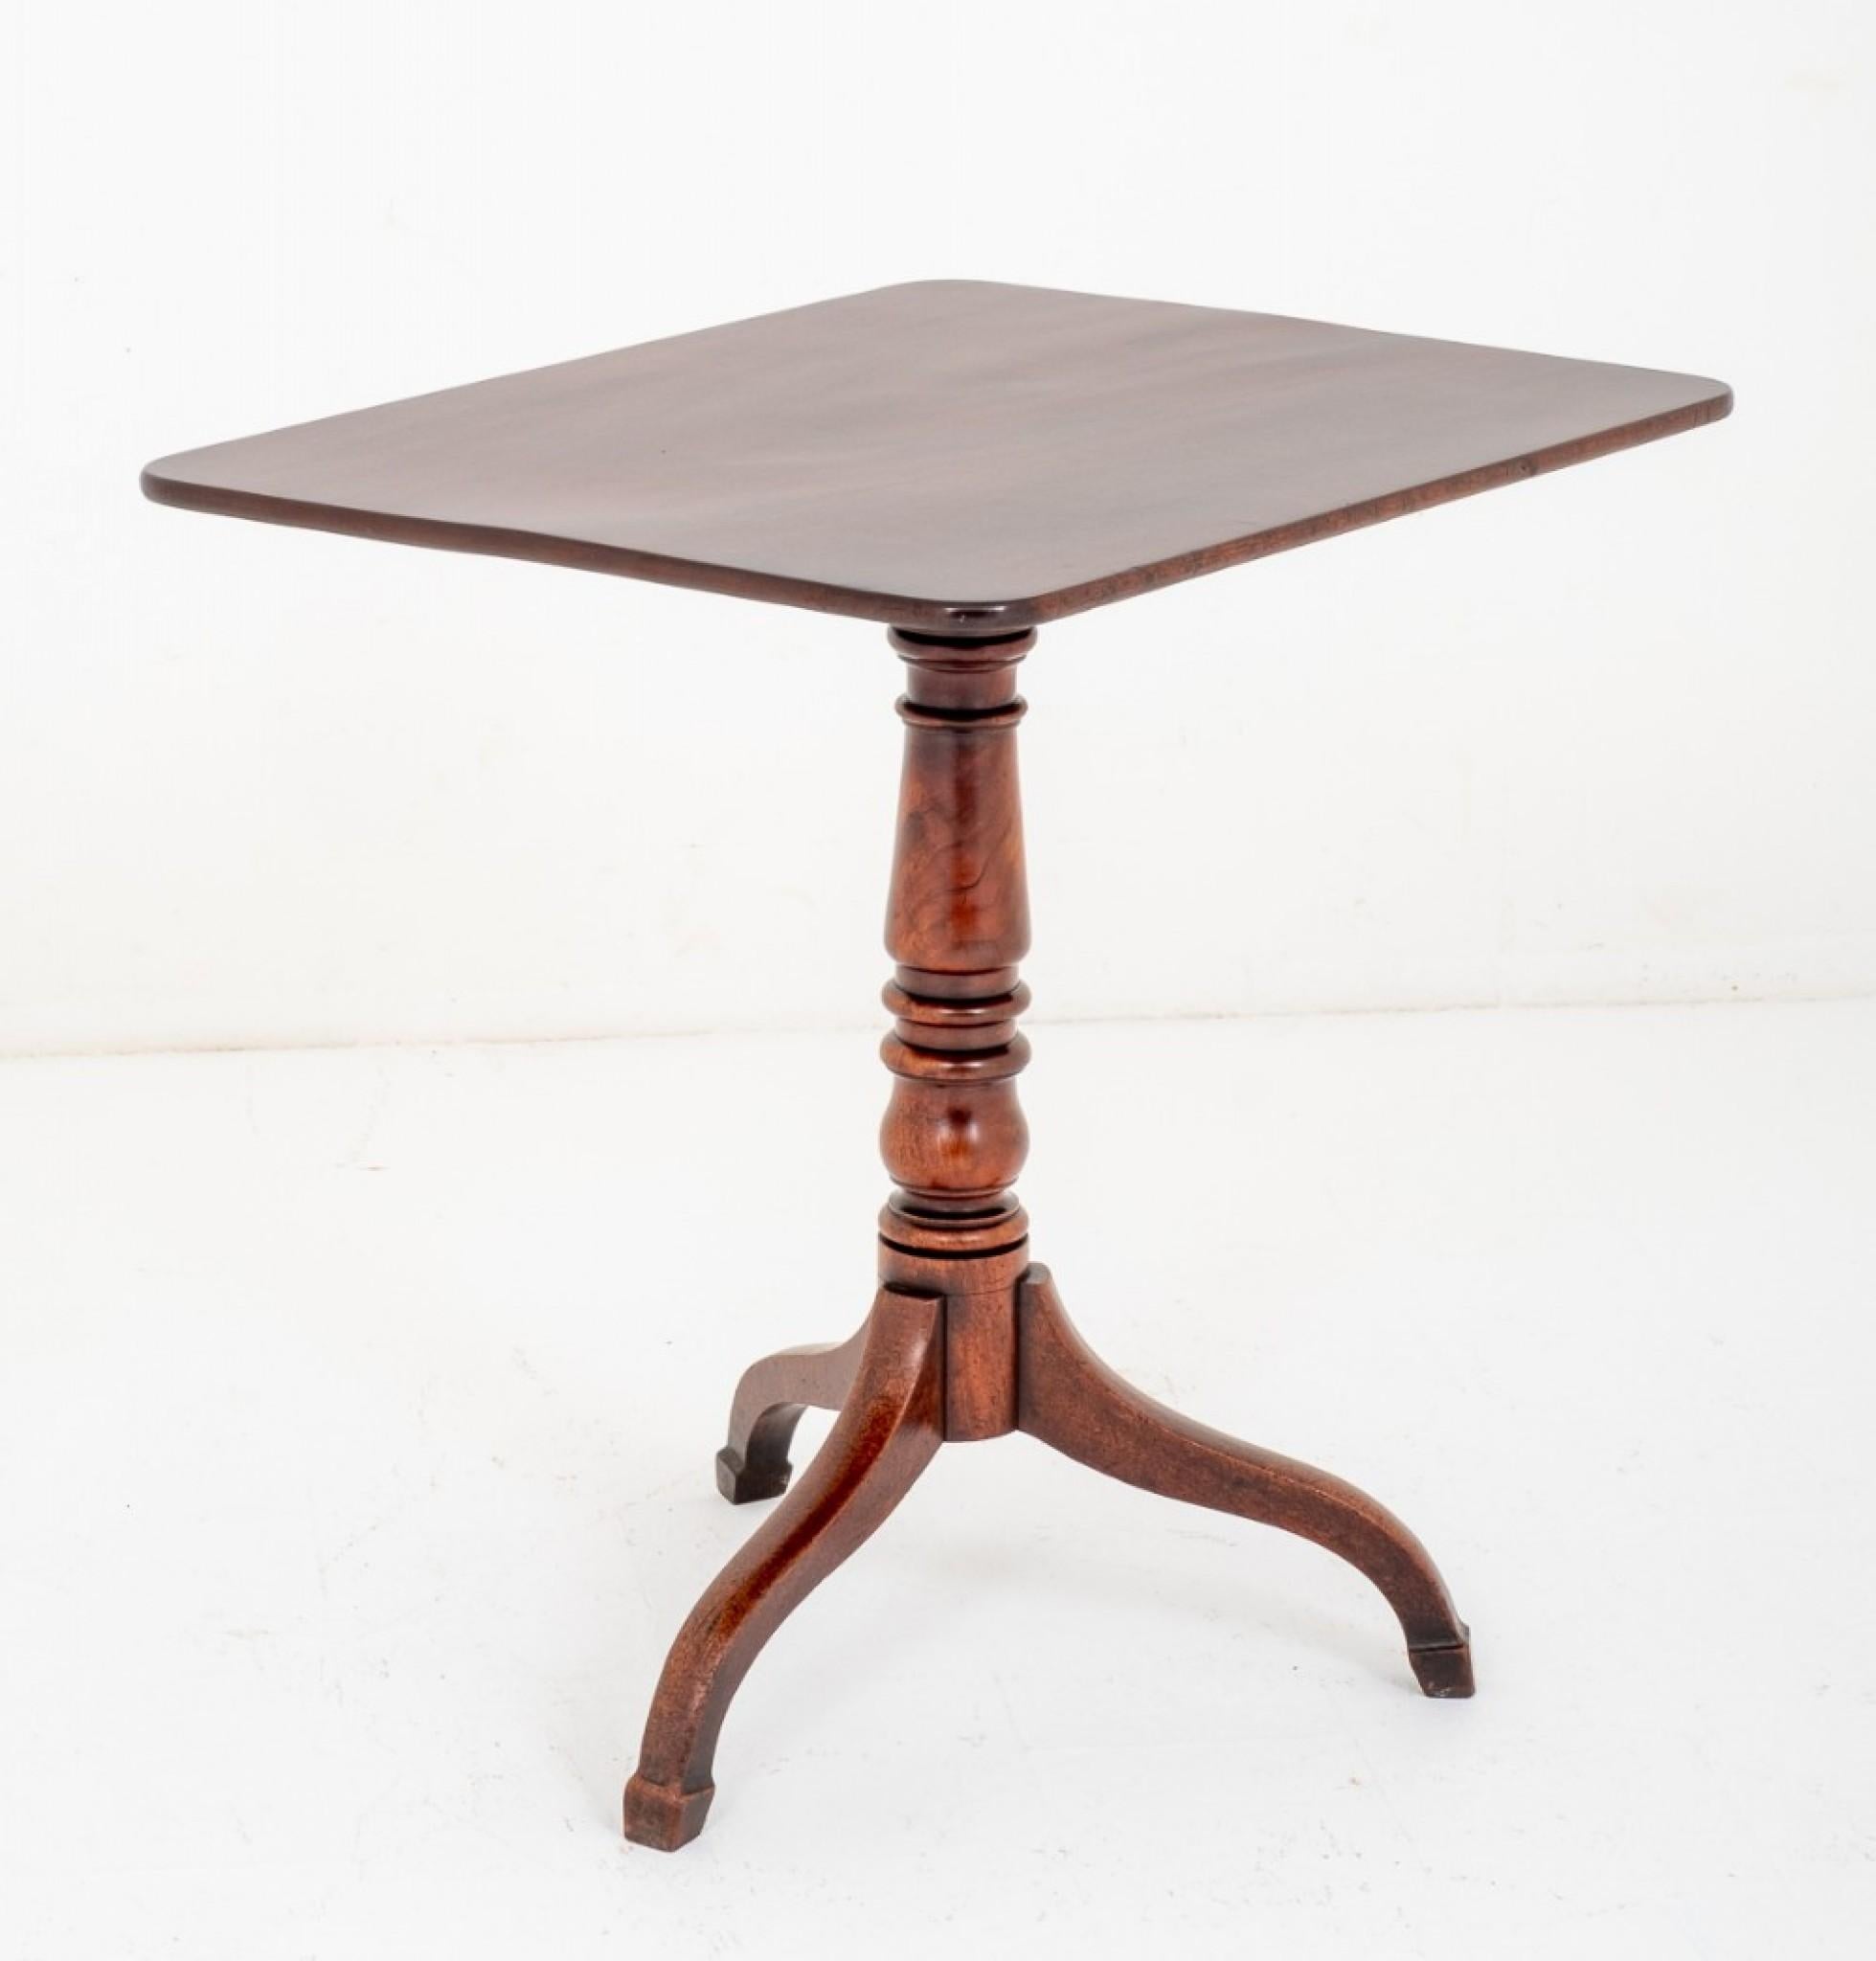 Regency mahogany wine table.
The top of the Table featuring Nicely Figured Timbers.
The Column being of a Ring Turned form and Stands upon 3 Shaped and Swept Legs with Spade feet.
A very Nice Quality Table presented in Good Condition.